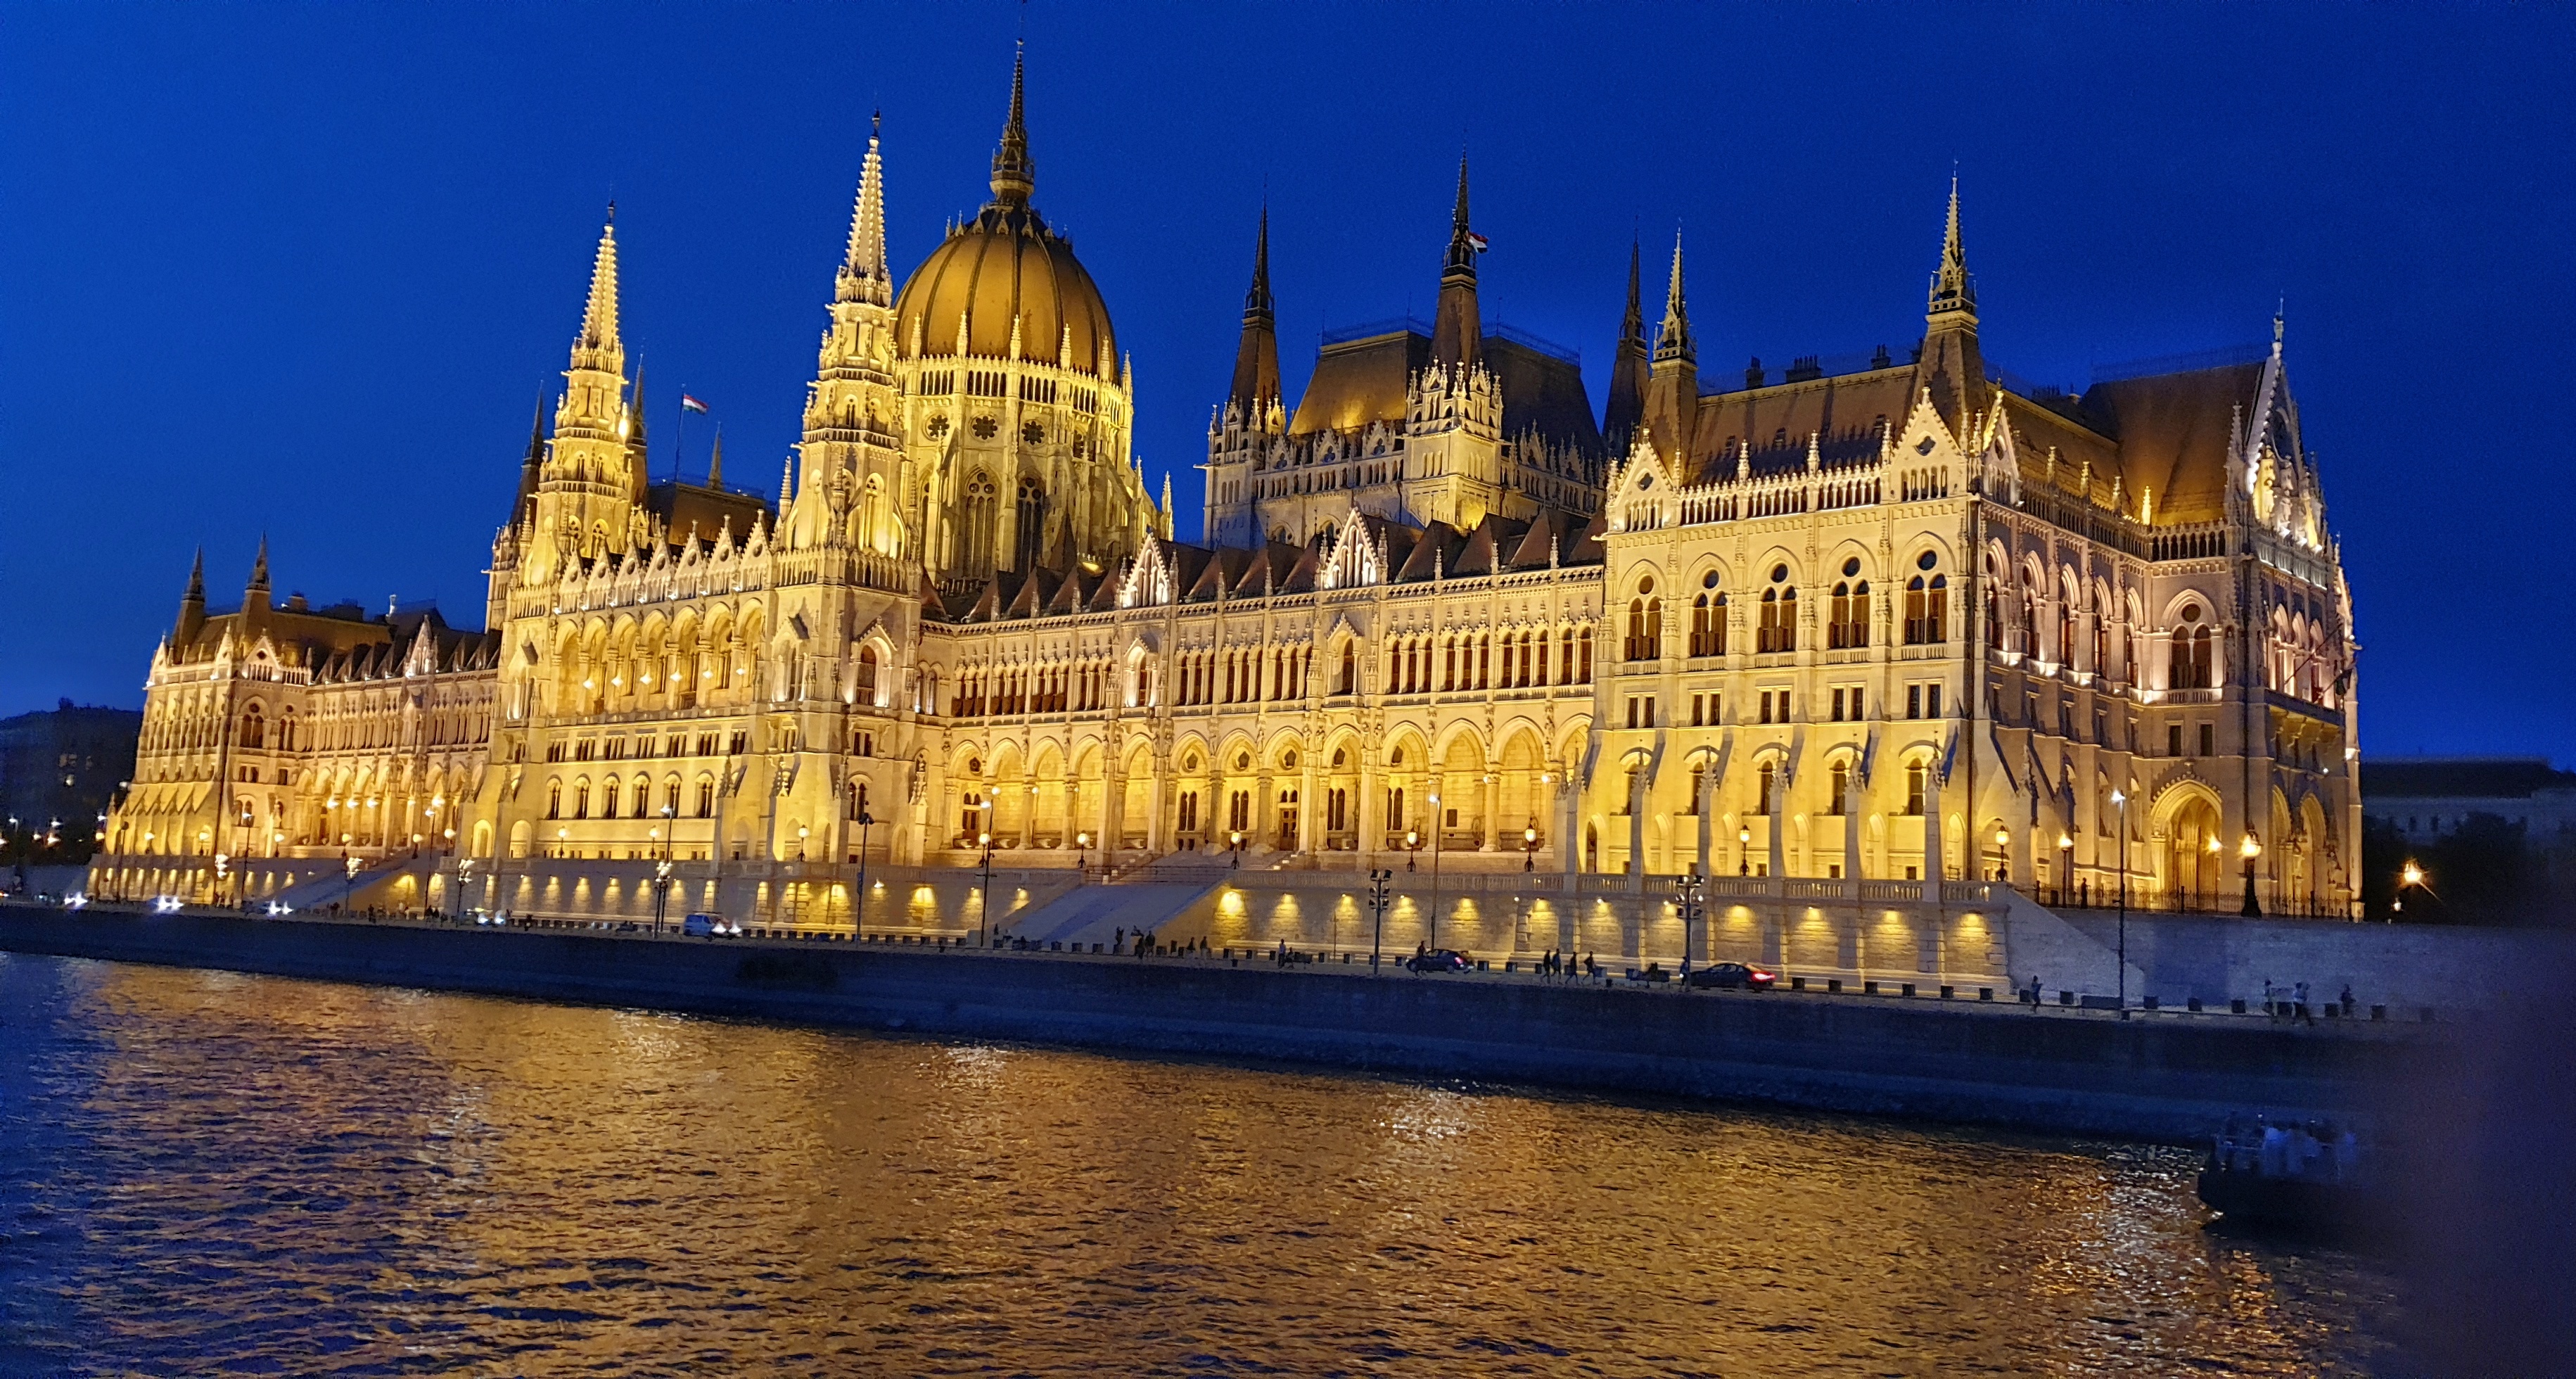 Parliament House lit up at night as seen from the Danube River